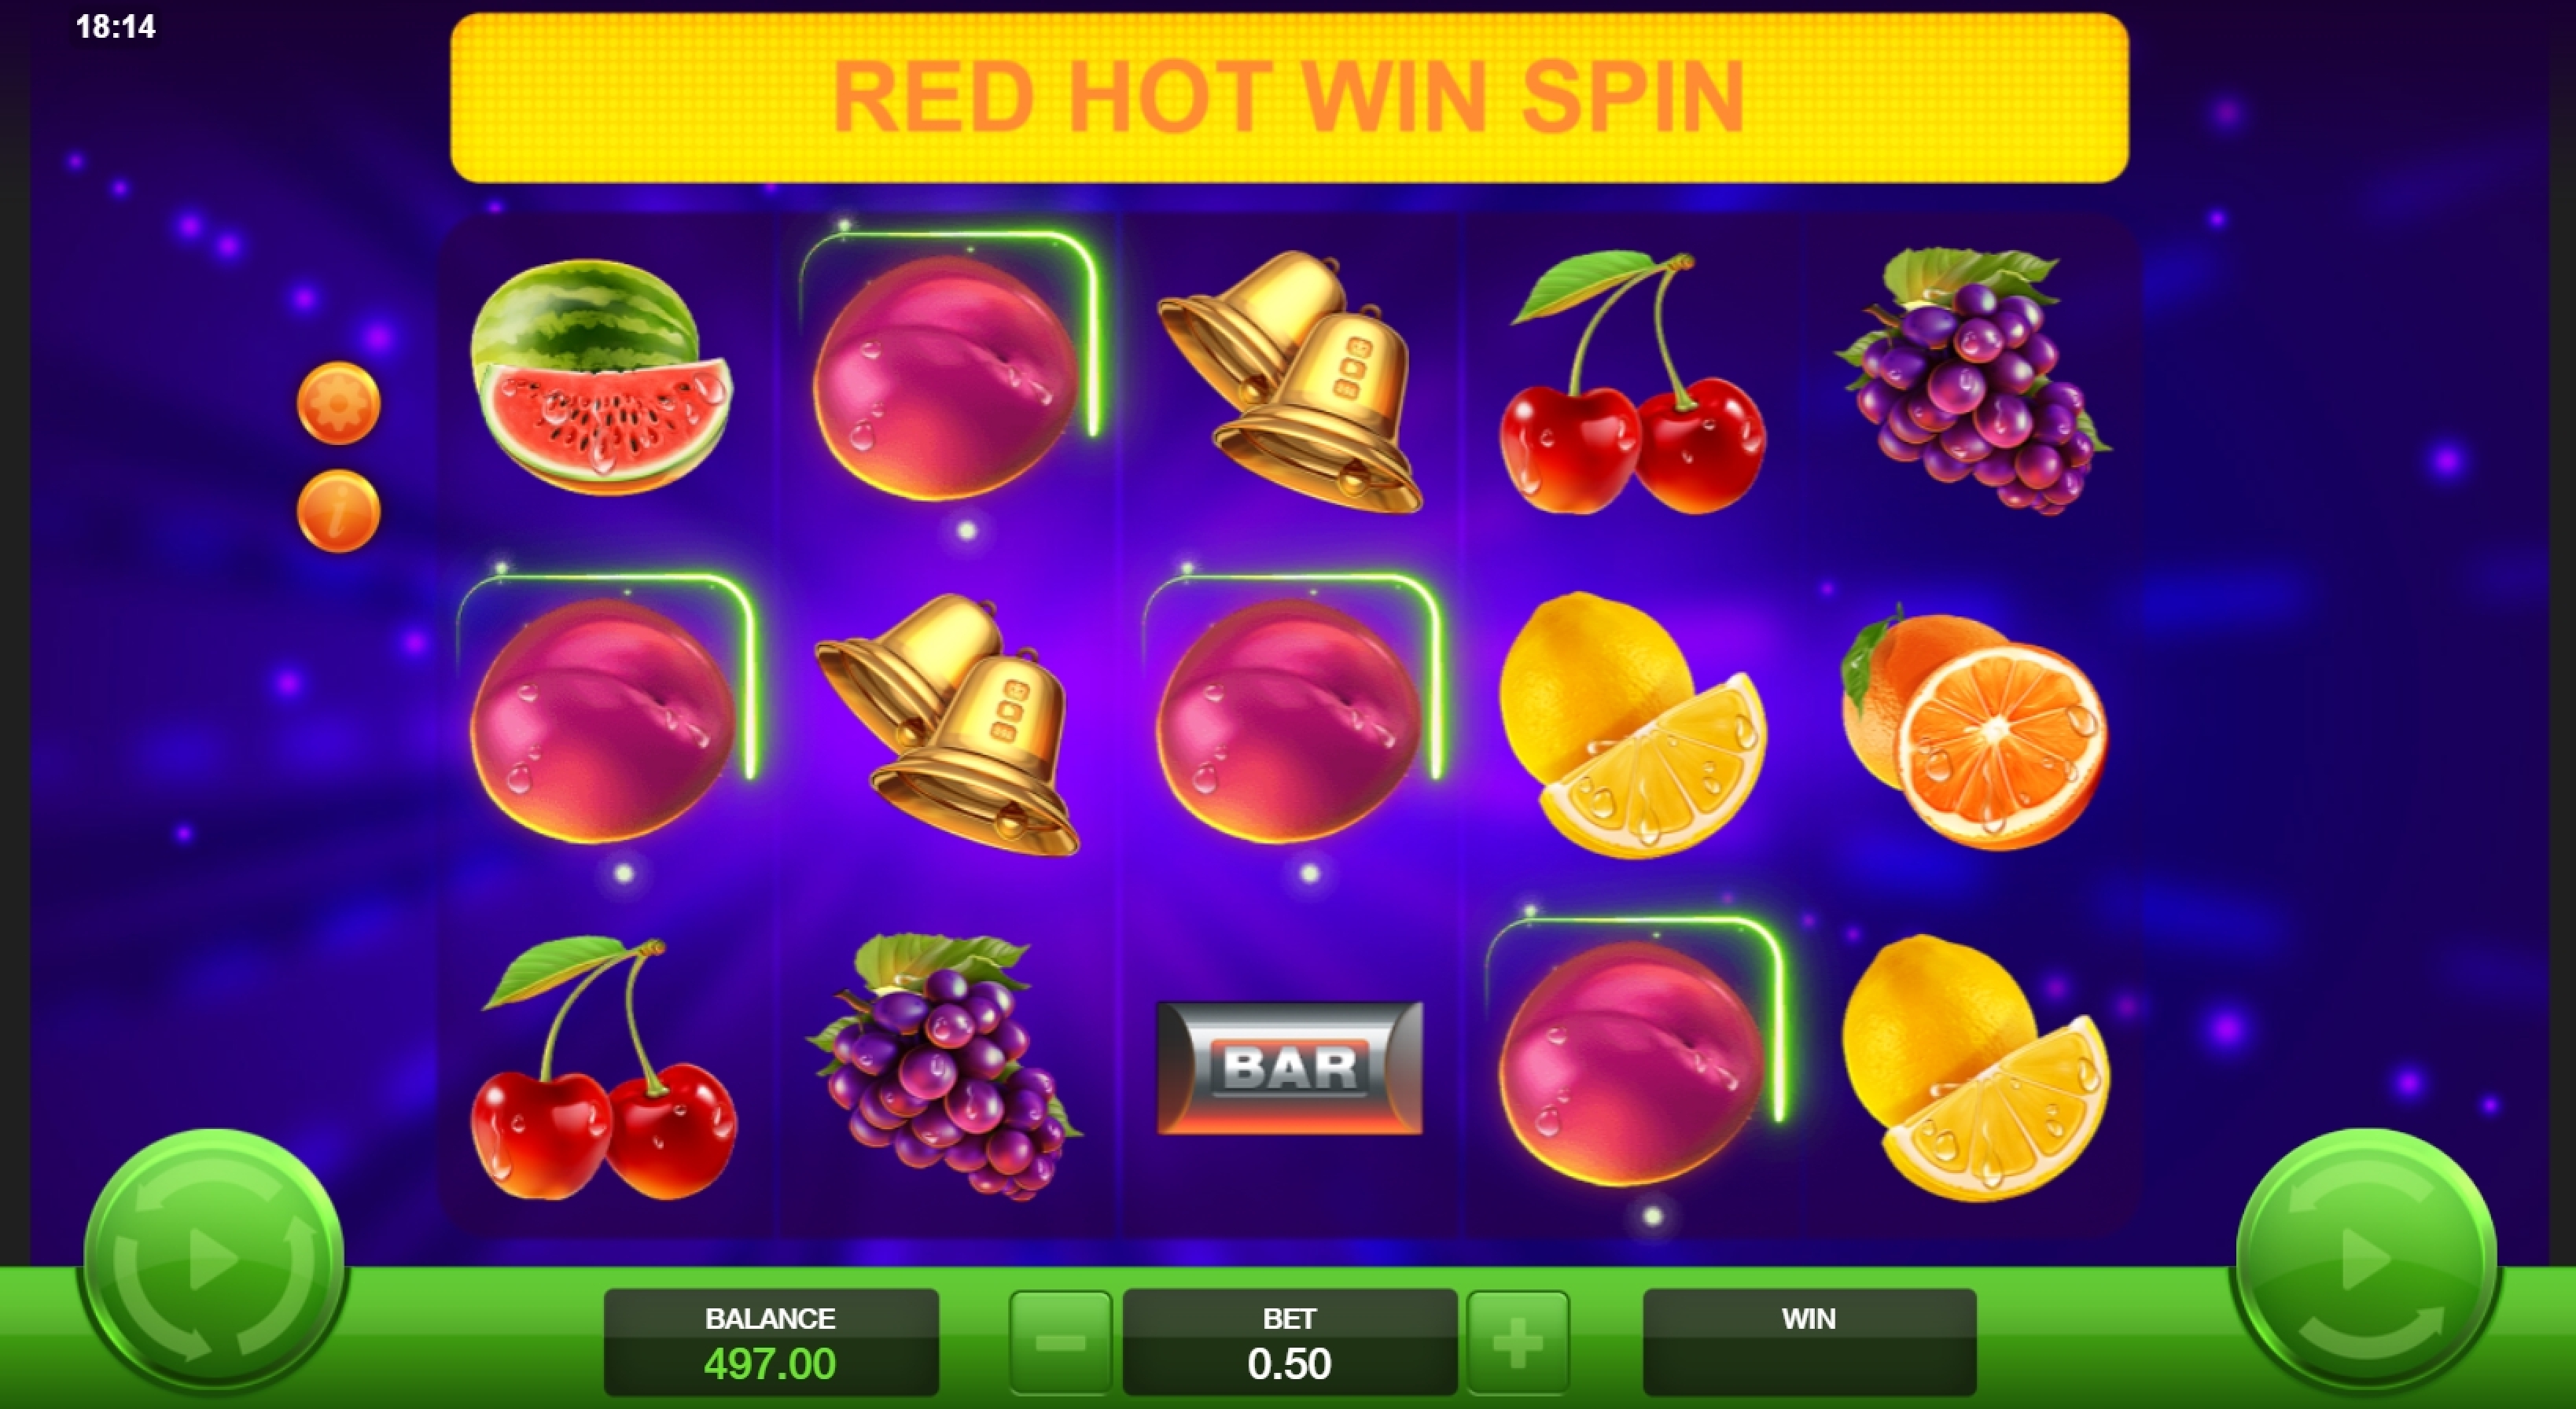 Win Money in Red Hot Win Spin Free Slot Game by Probability Jones